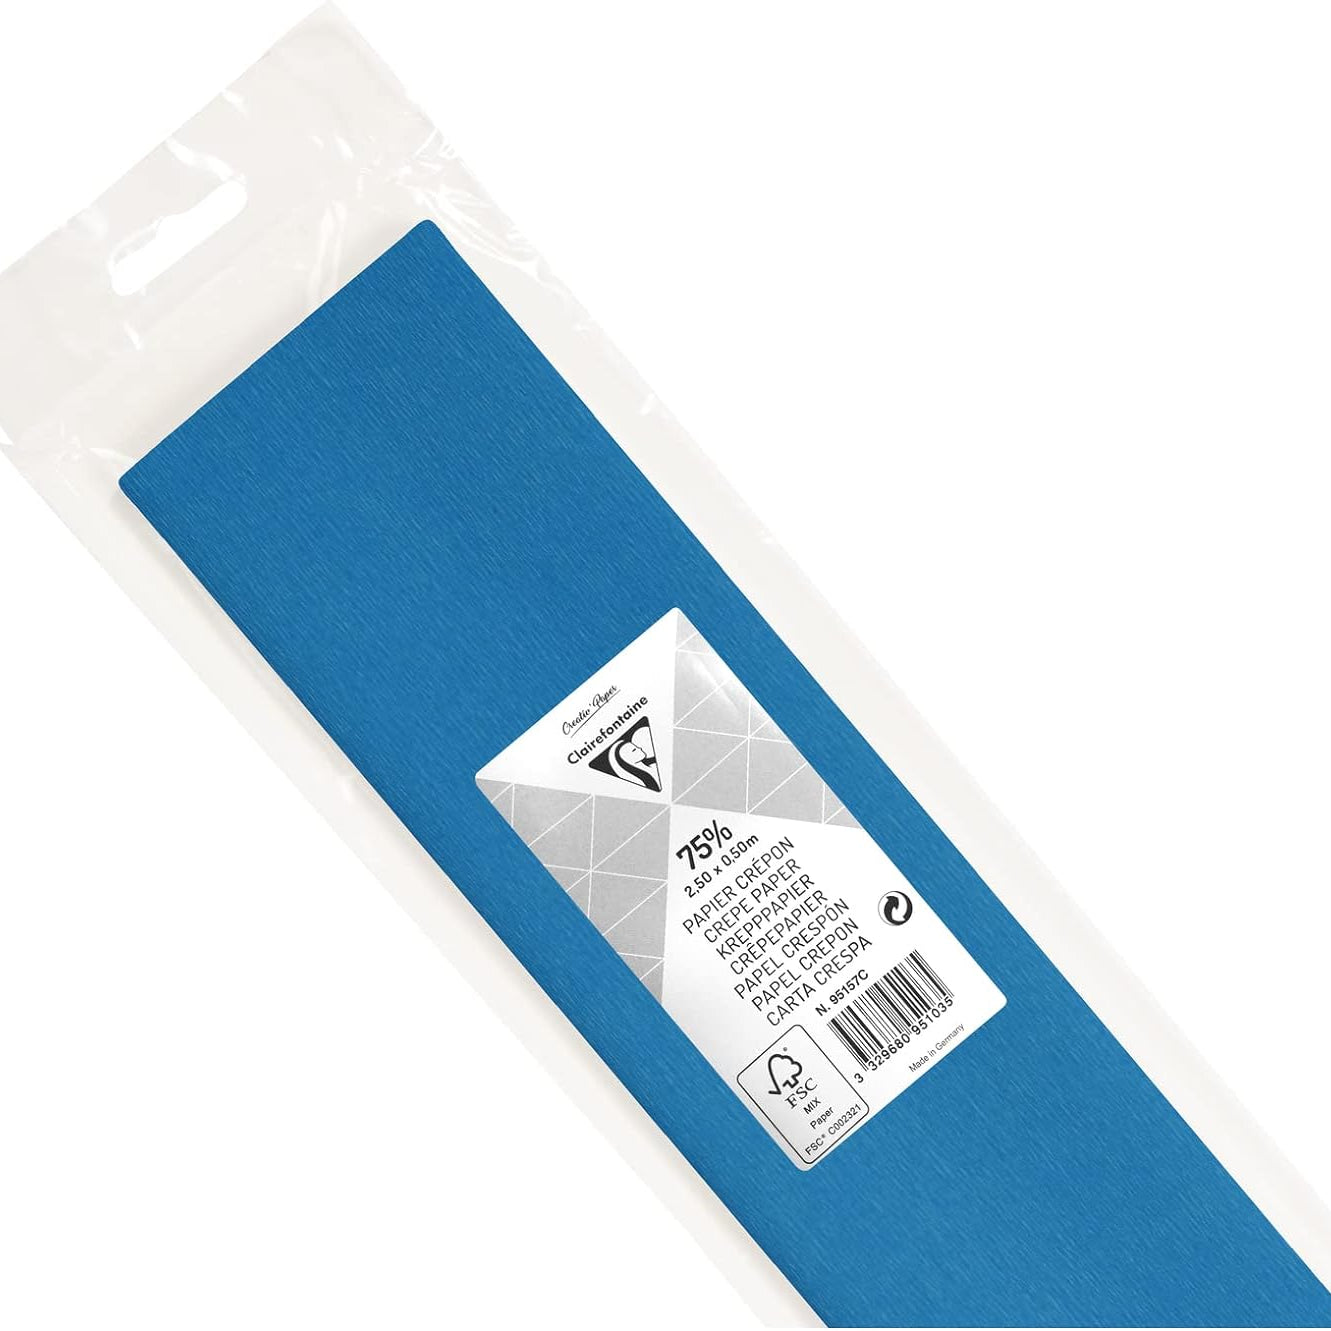 CLAIREFONTAINE Crepe Paper Roll 75% 2.5x0.5M Petrol Blue